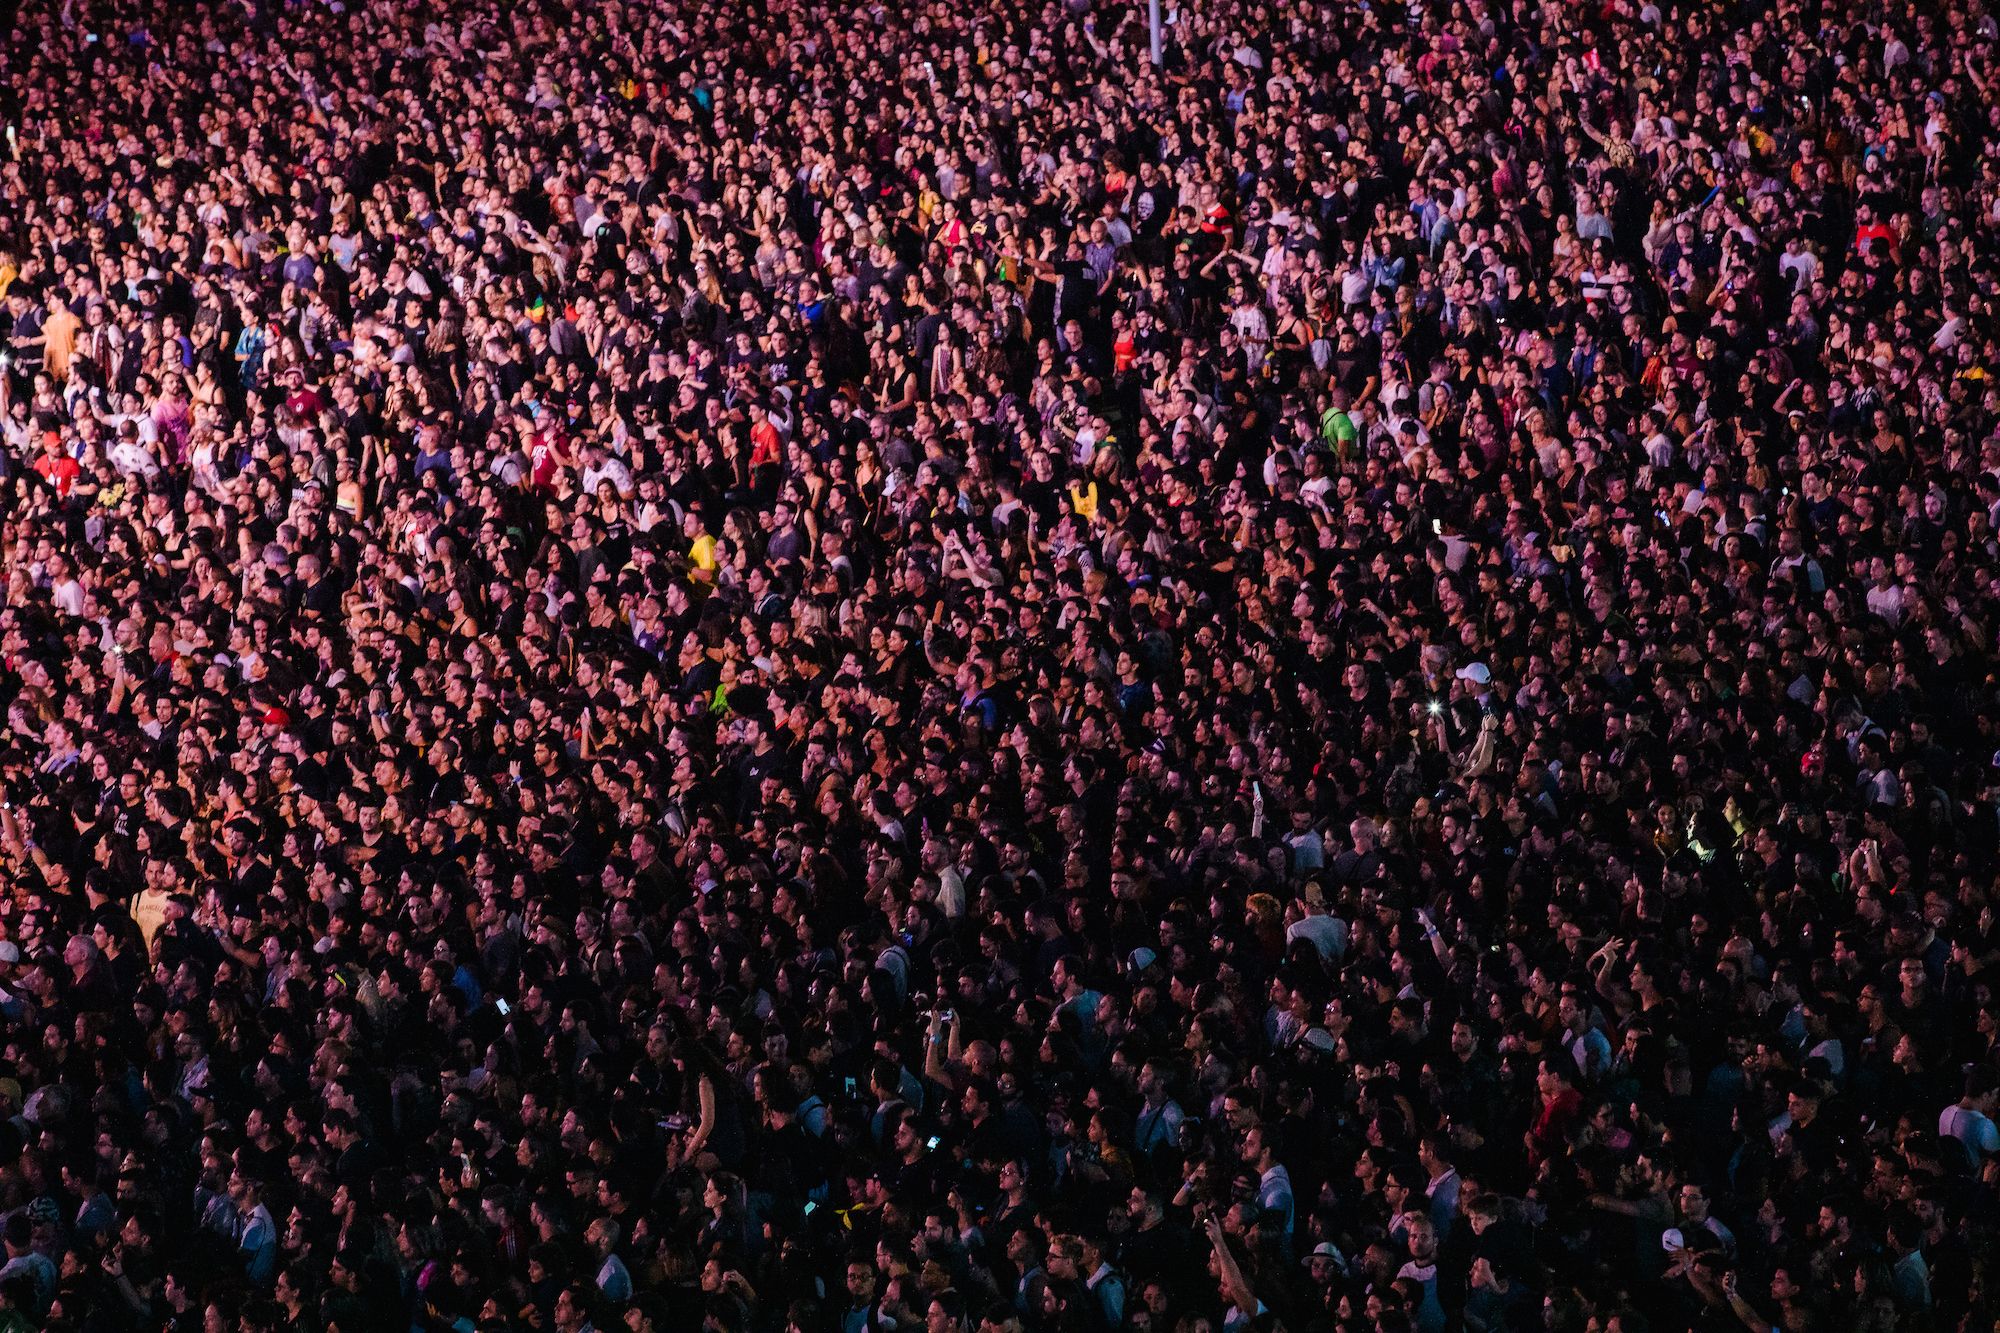 rio de janeiro, brazil   october 6 a general view of the audience crowd during day 7 of rock in rio music festival at cidade do rock on october 6, 2019 in rio de janeiro, brazil photo by mauricio santanagetty images